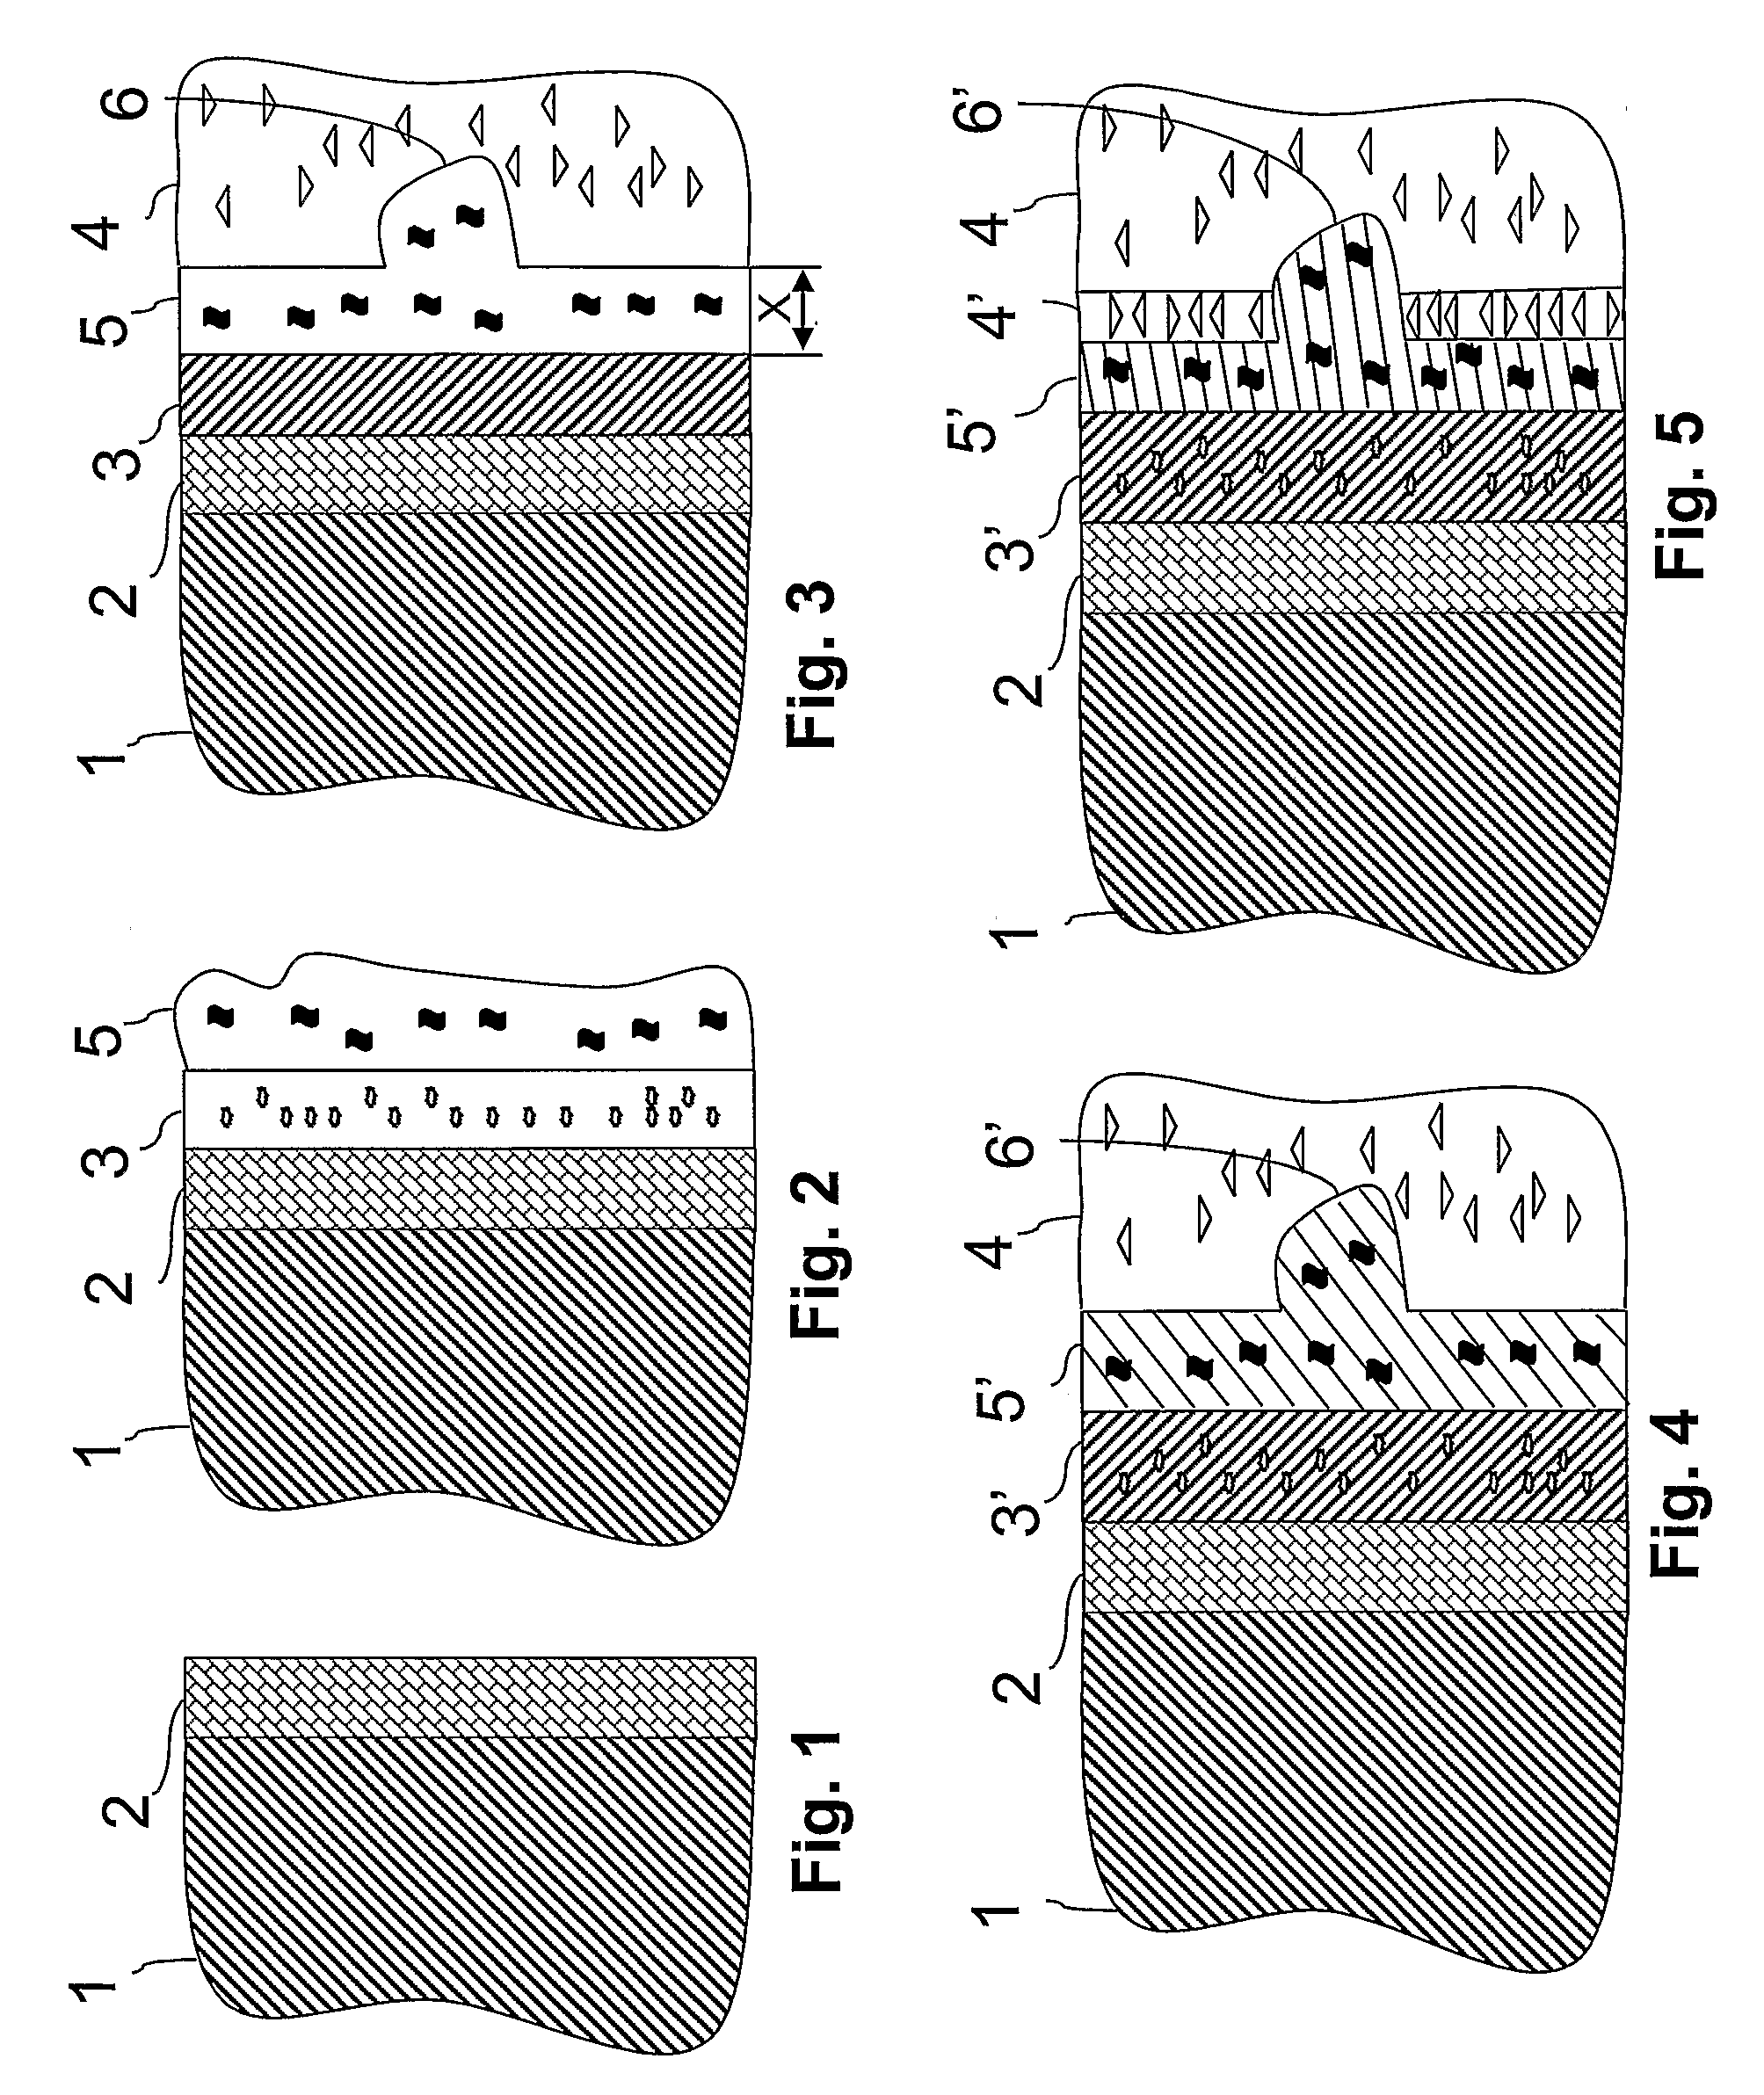 Implant and method of producing the same, and a system for implantation